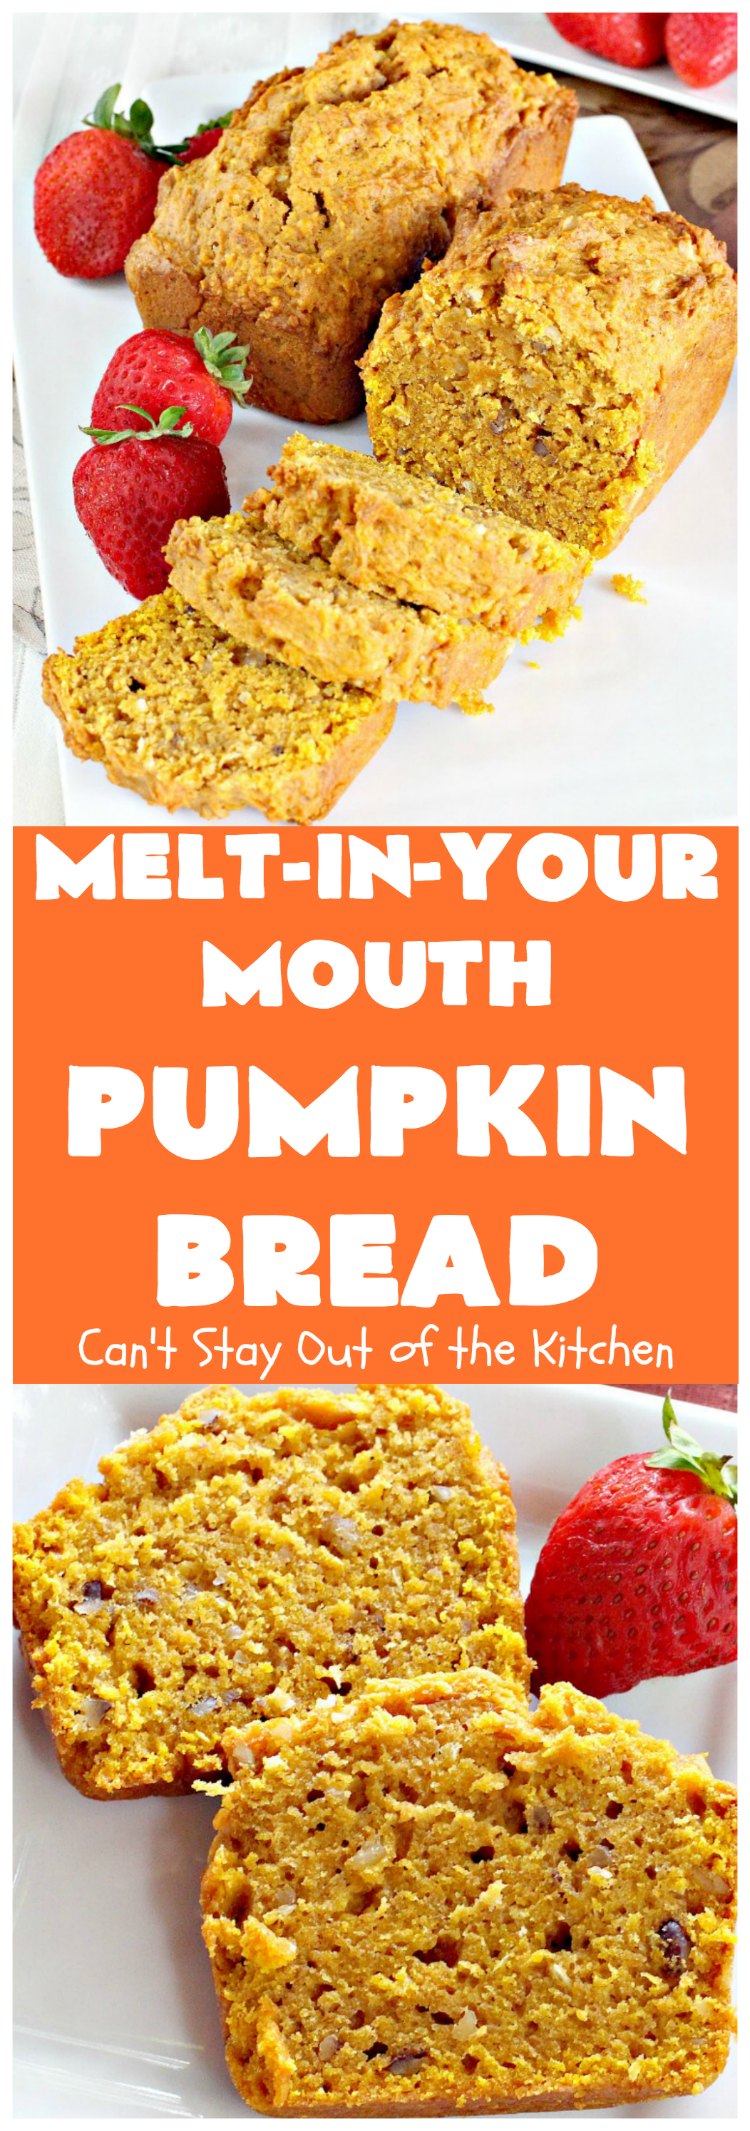 Melt-In-Your-Mouth Pumpkin Bread | Can't Stay Out of the Kitchen